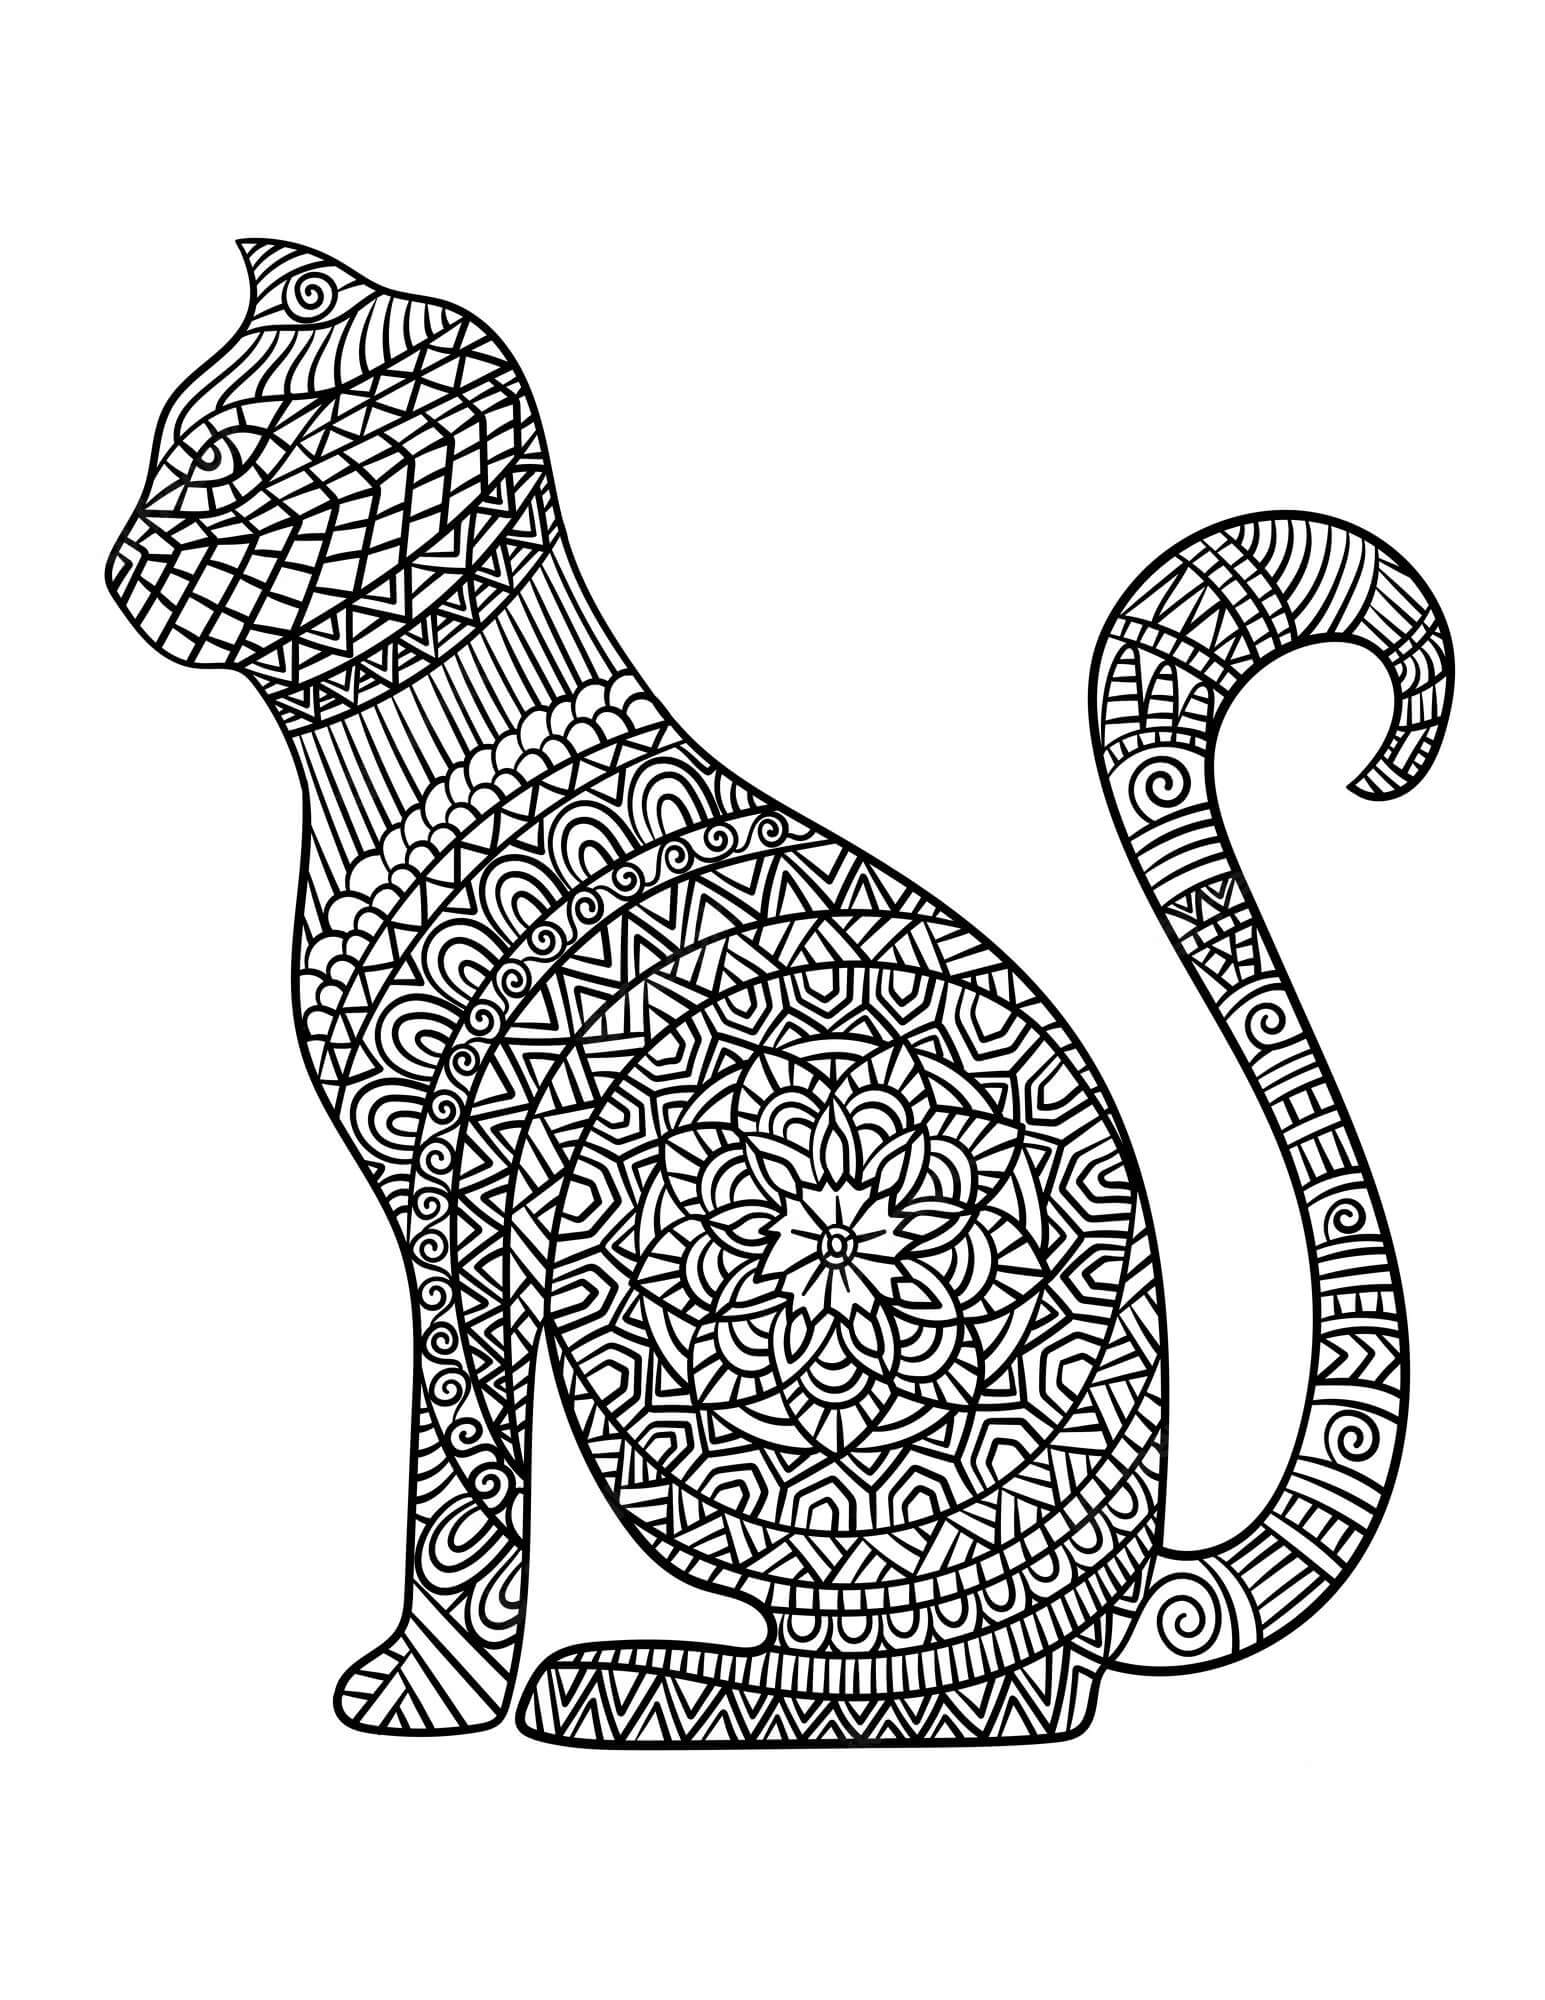 Cat Sitting Mandala coloring page - Download, Print or Color Online for ...